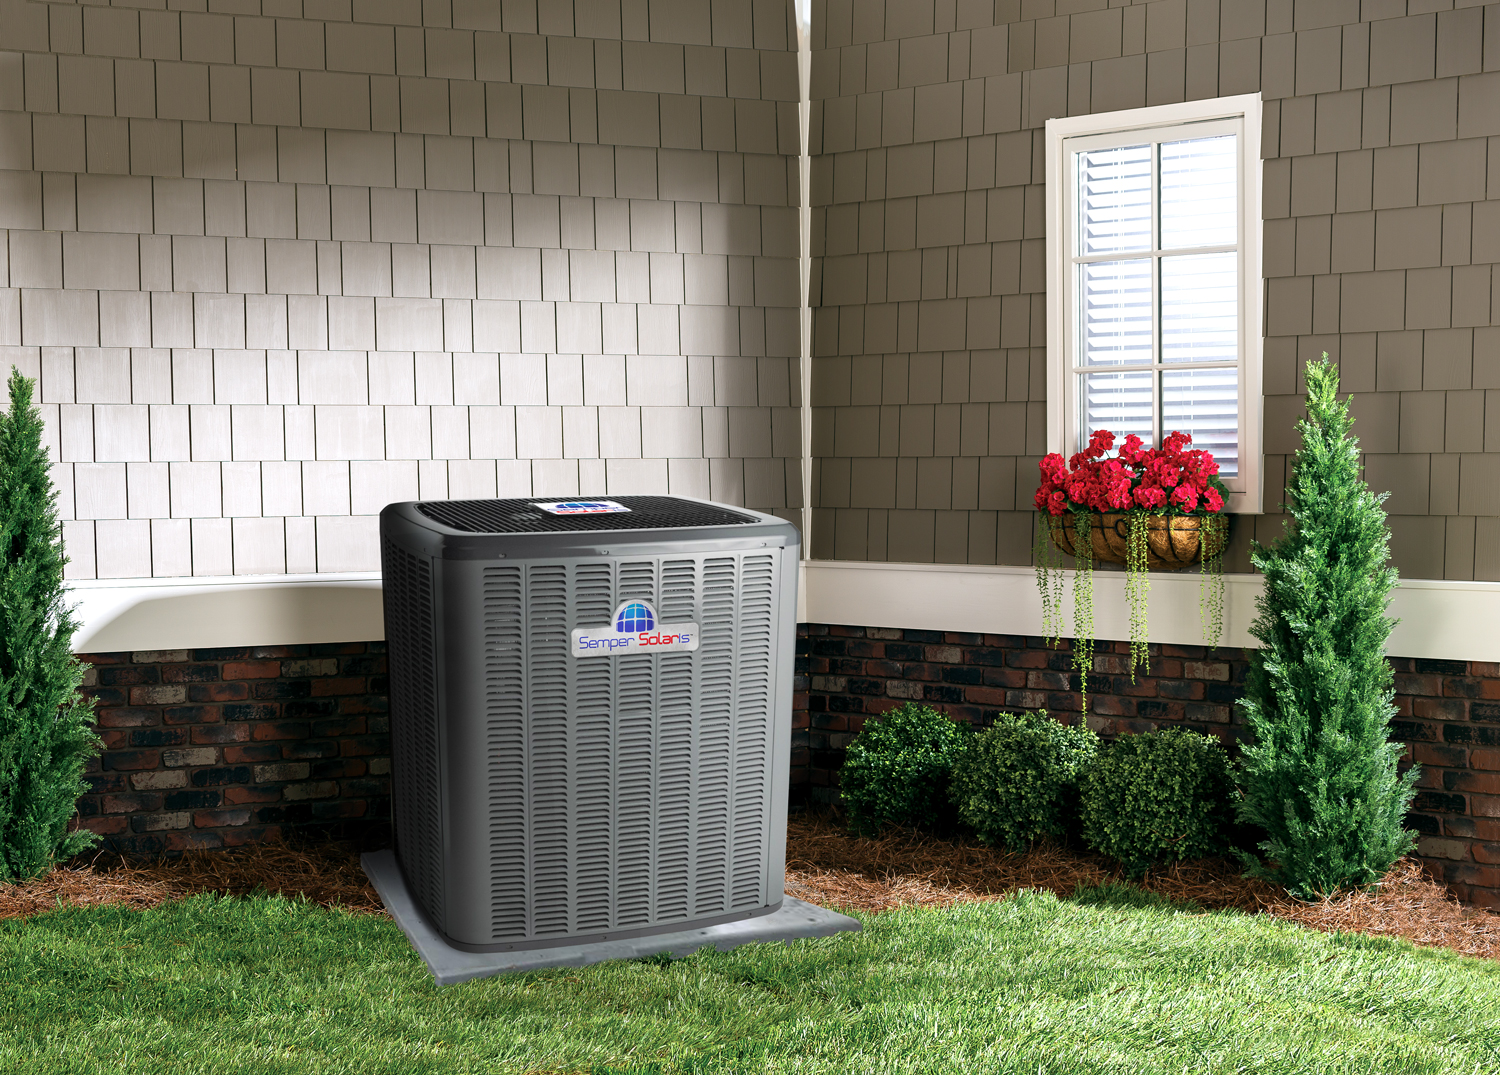 How Much is a New Heating and Air Conditioning Unit? Semper Solaris